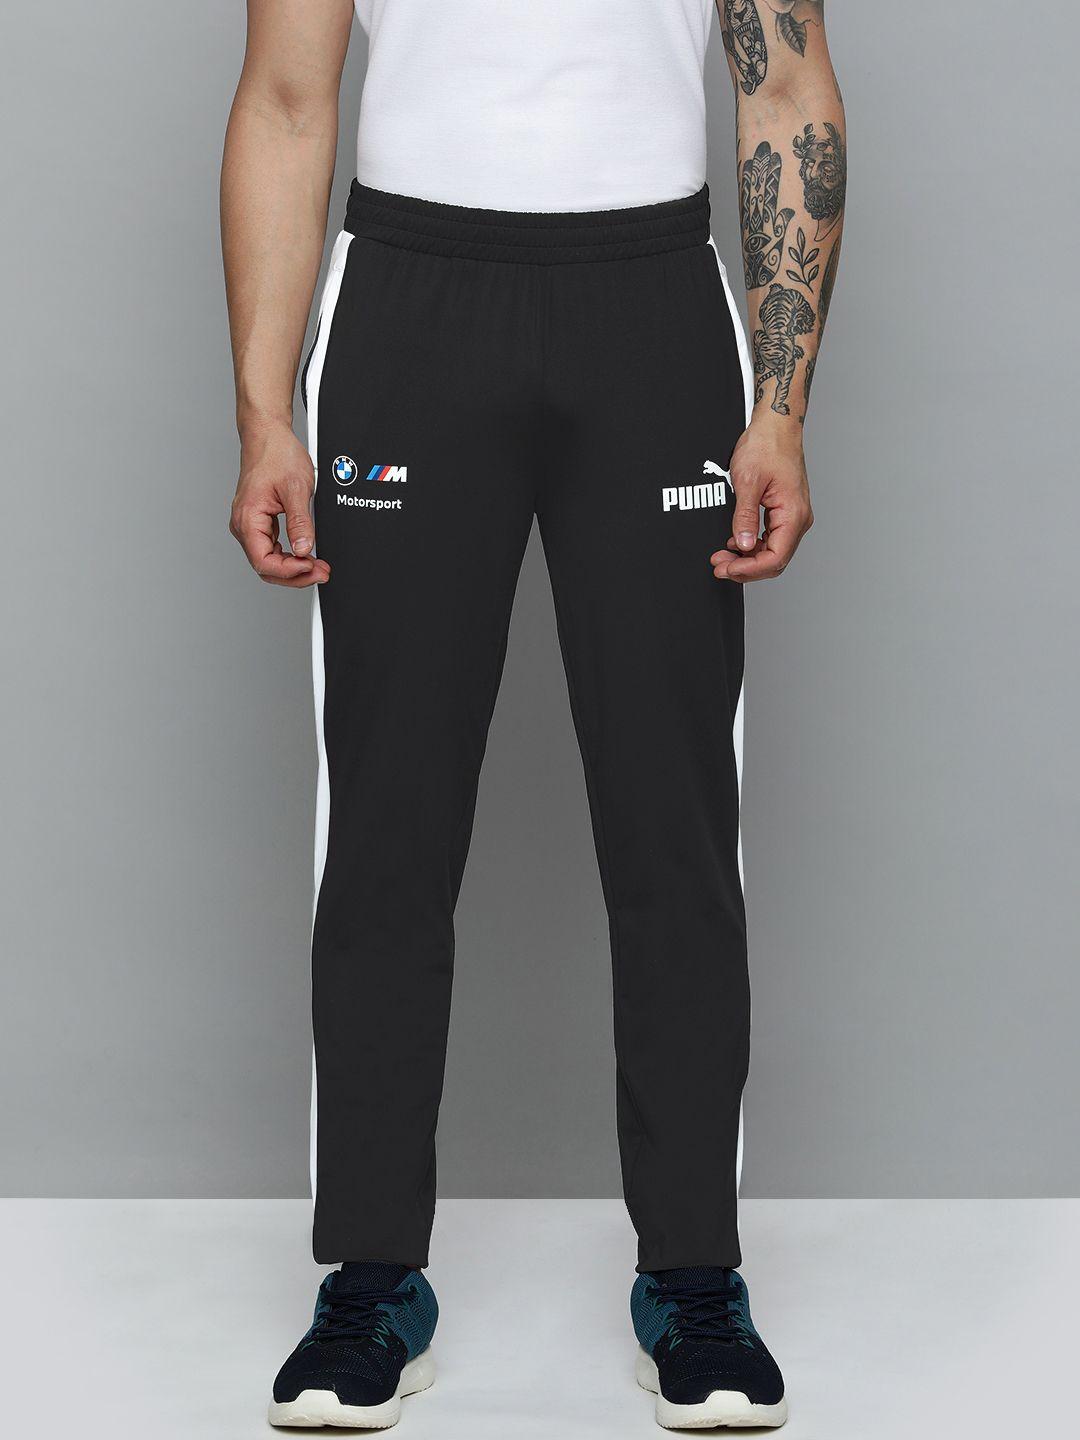 puma motorsport brand logo printed slim- fit track pants with drycell technology